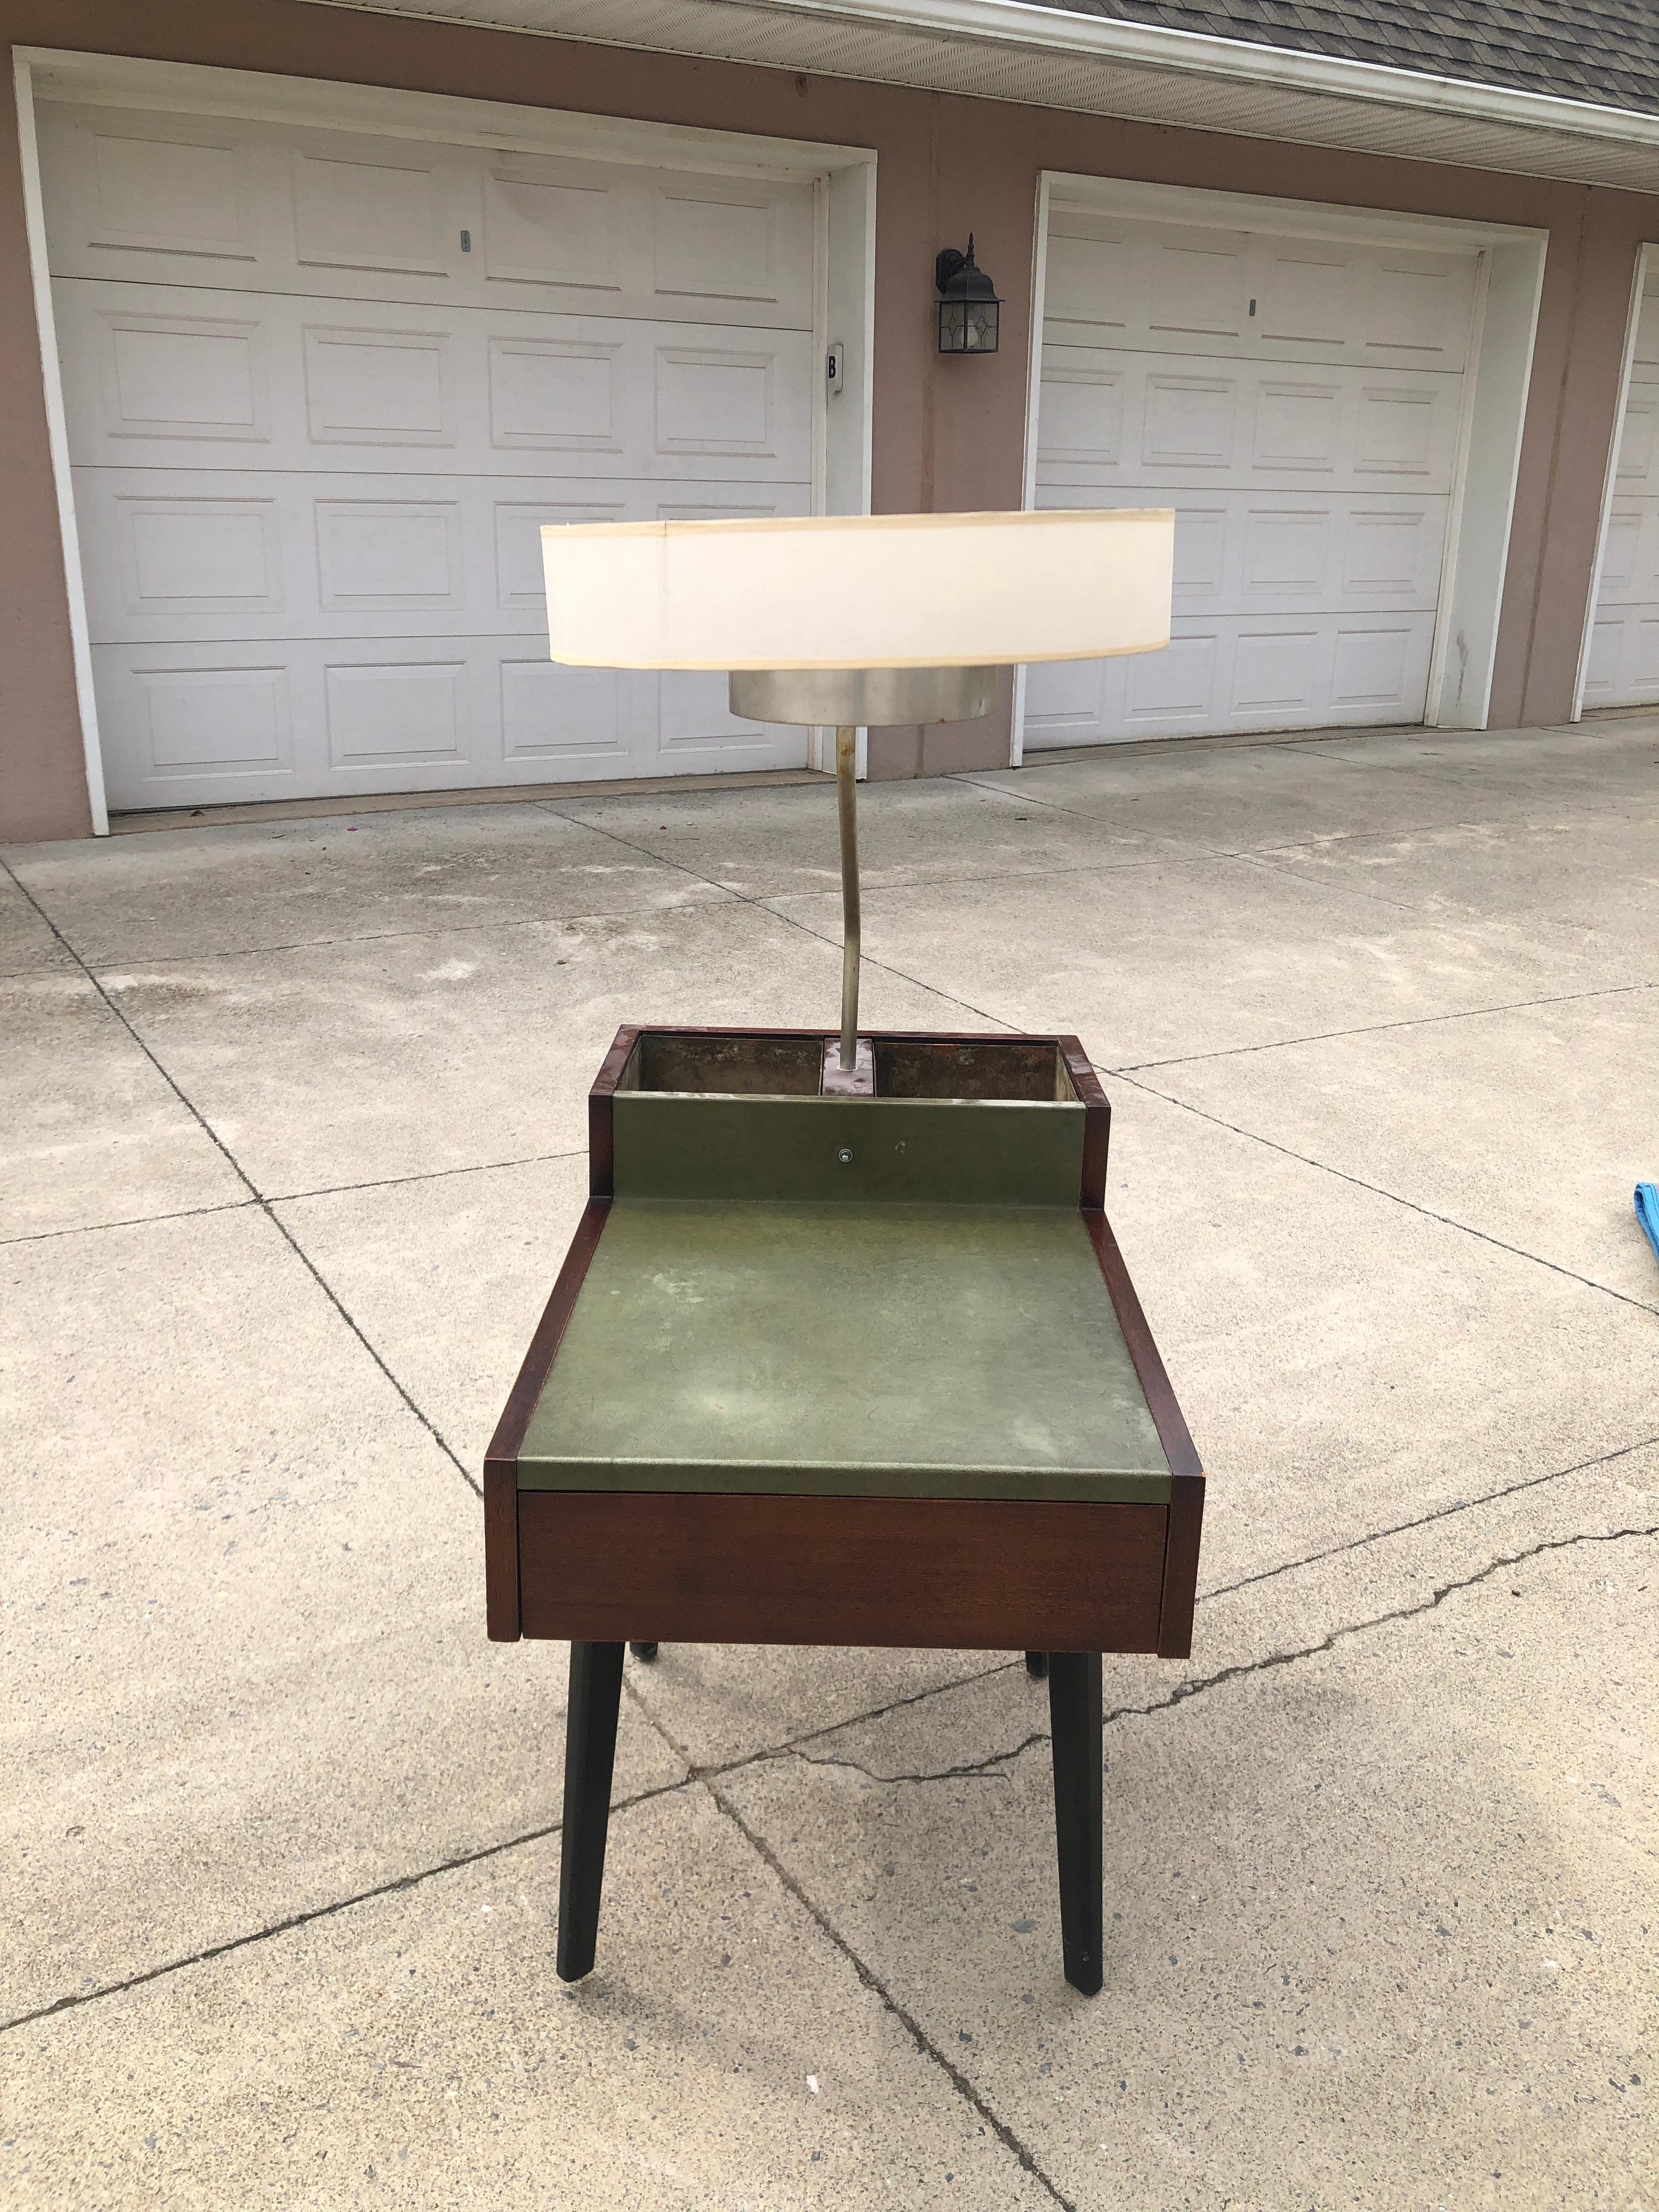 Unique and rare Mid-Century Modern Model 4634-L side table with lamp and planters designed by George Nelson for Herman Miller, circa 1940s. Featuring a handsome walnut case with a coordinating and complimenting leather tabletop. A lamp rises from